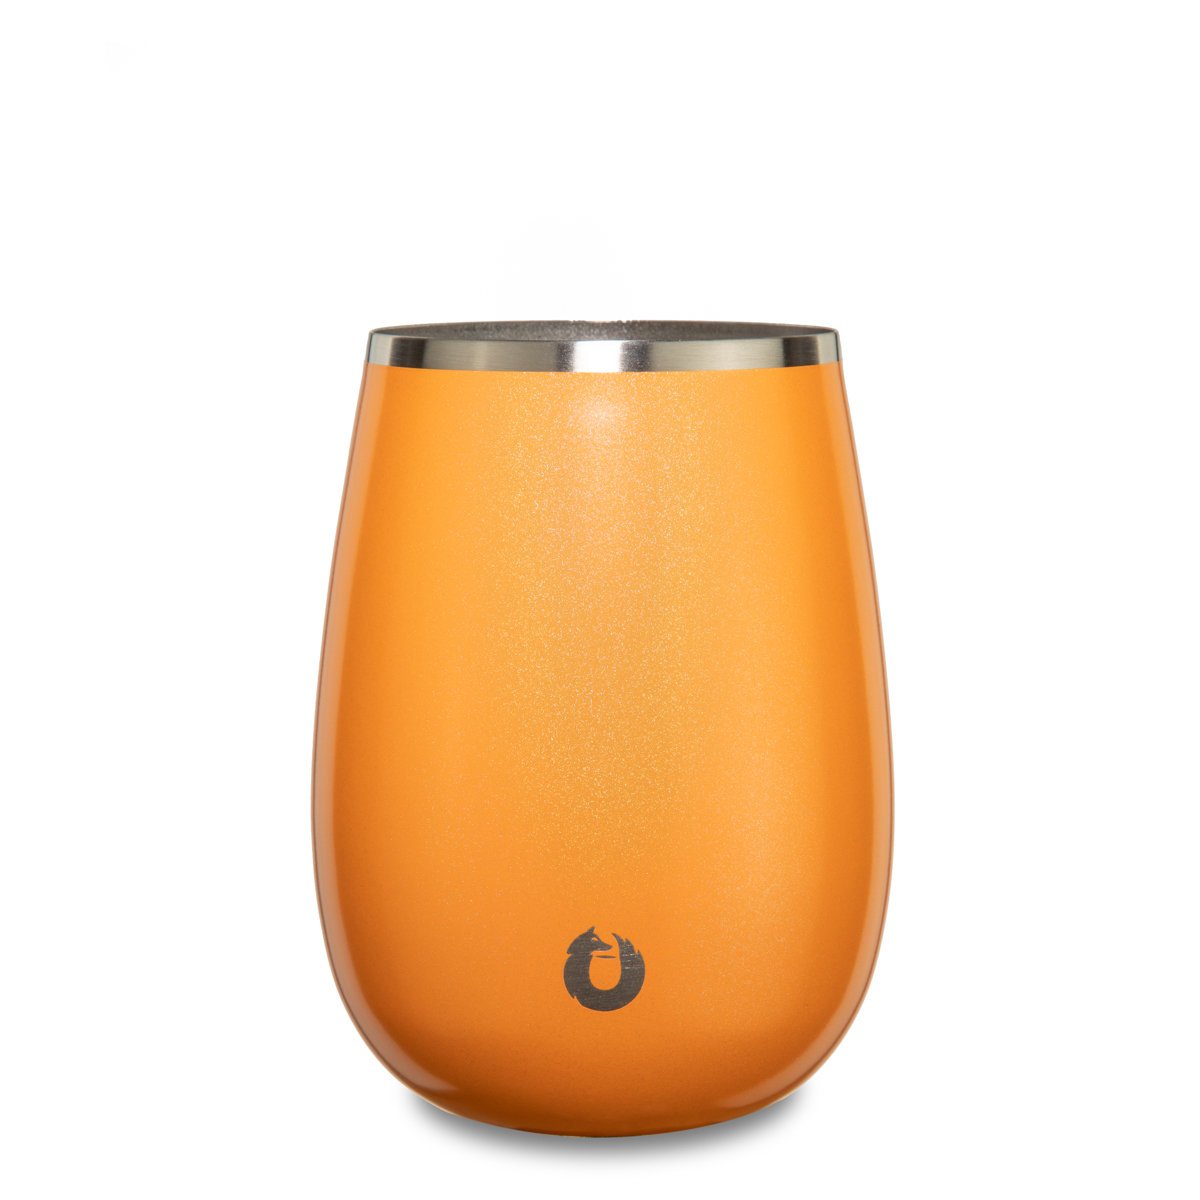 Snowfox® 8 oz. Shimmer Finish Vacuum Insulated Martini Cup